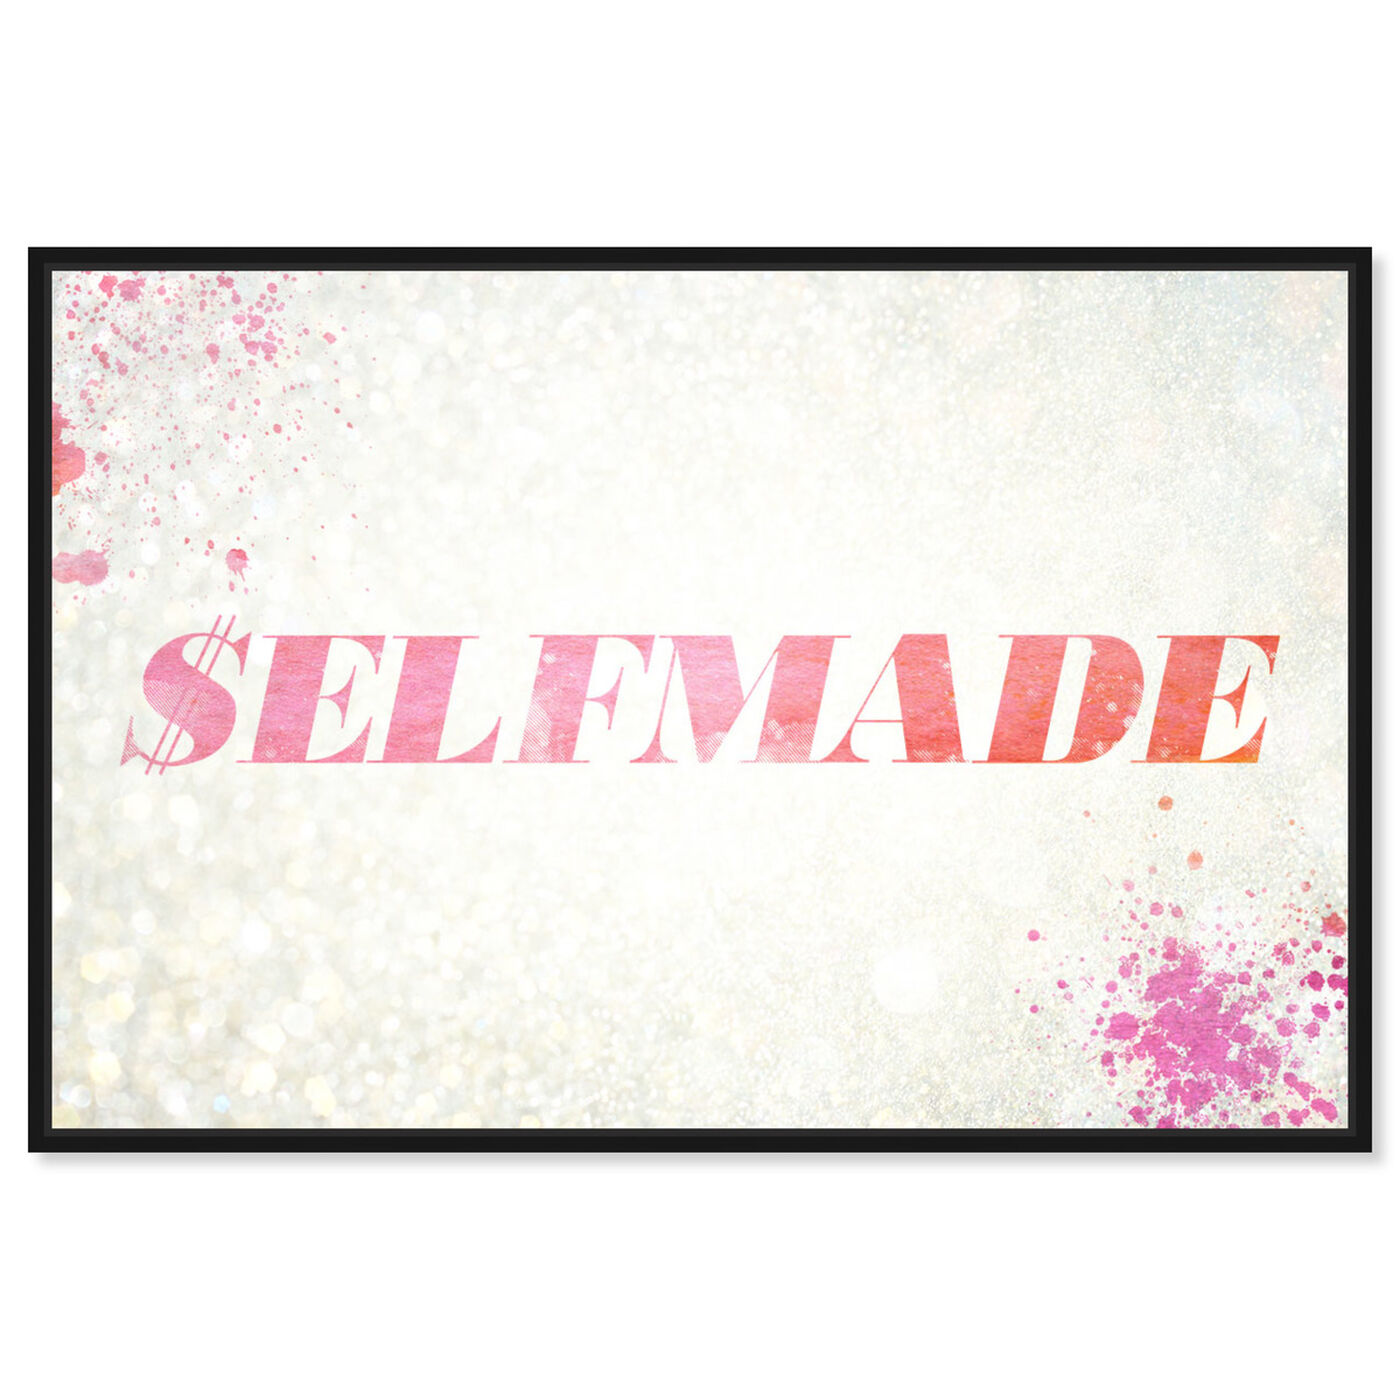 Front view of $elfmade Coral featuring typography and quotes and quotes and sayings art.